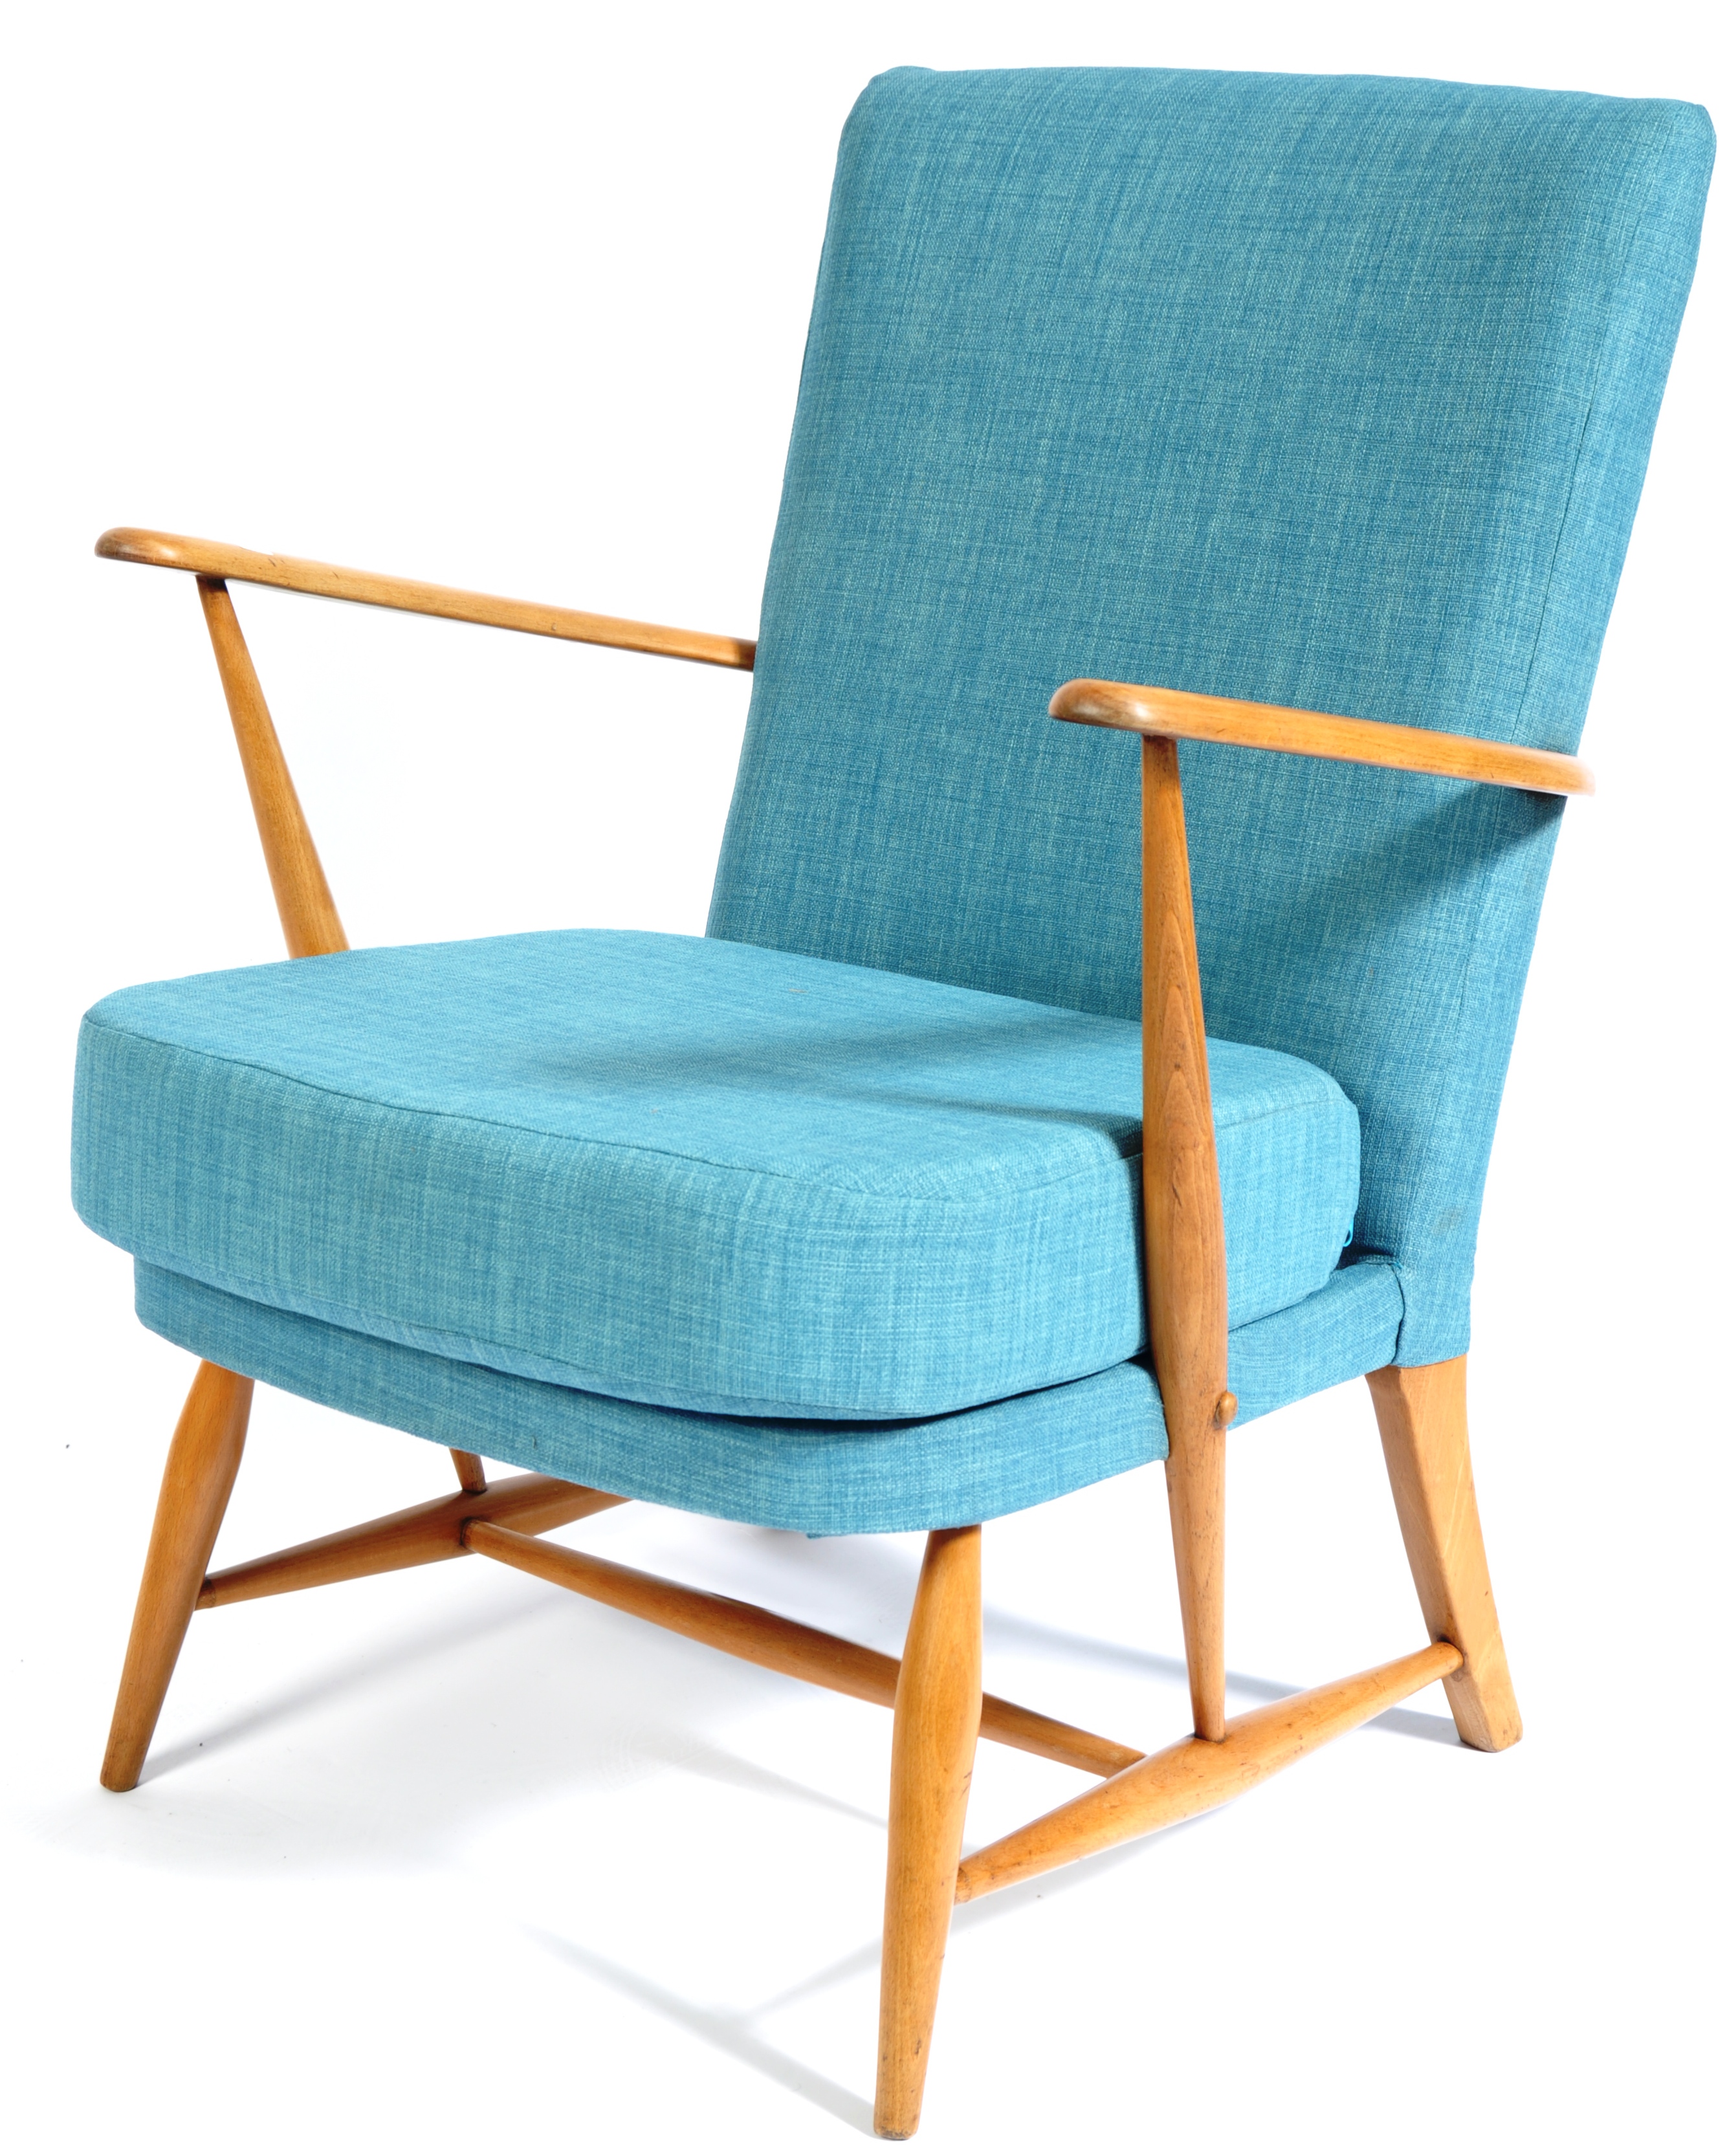 ERCOL MODEL 248 1950'S BEECH AND ELM LOUNGE CHAIR BY L. ERCOLANI